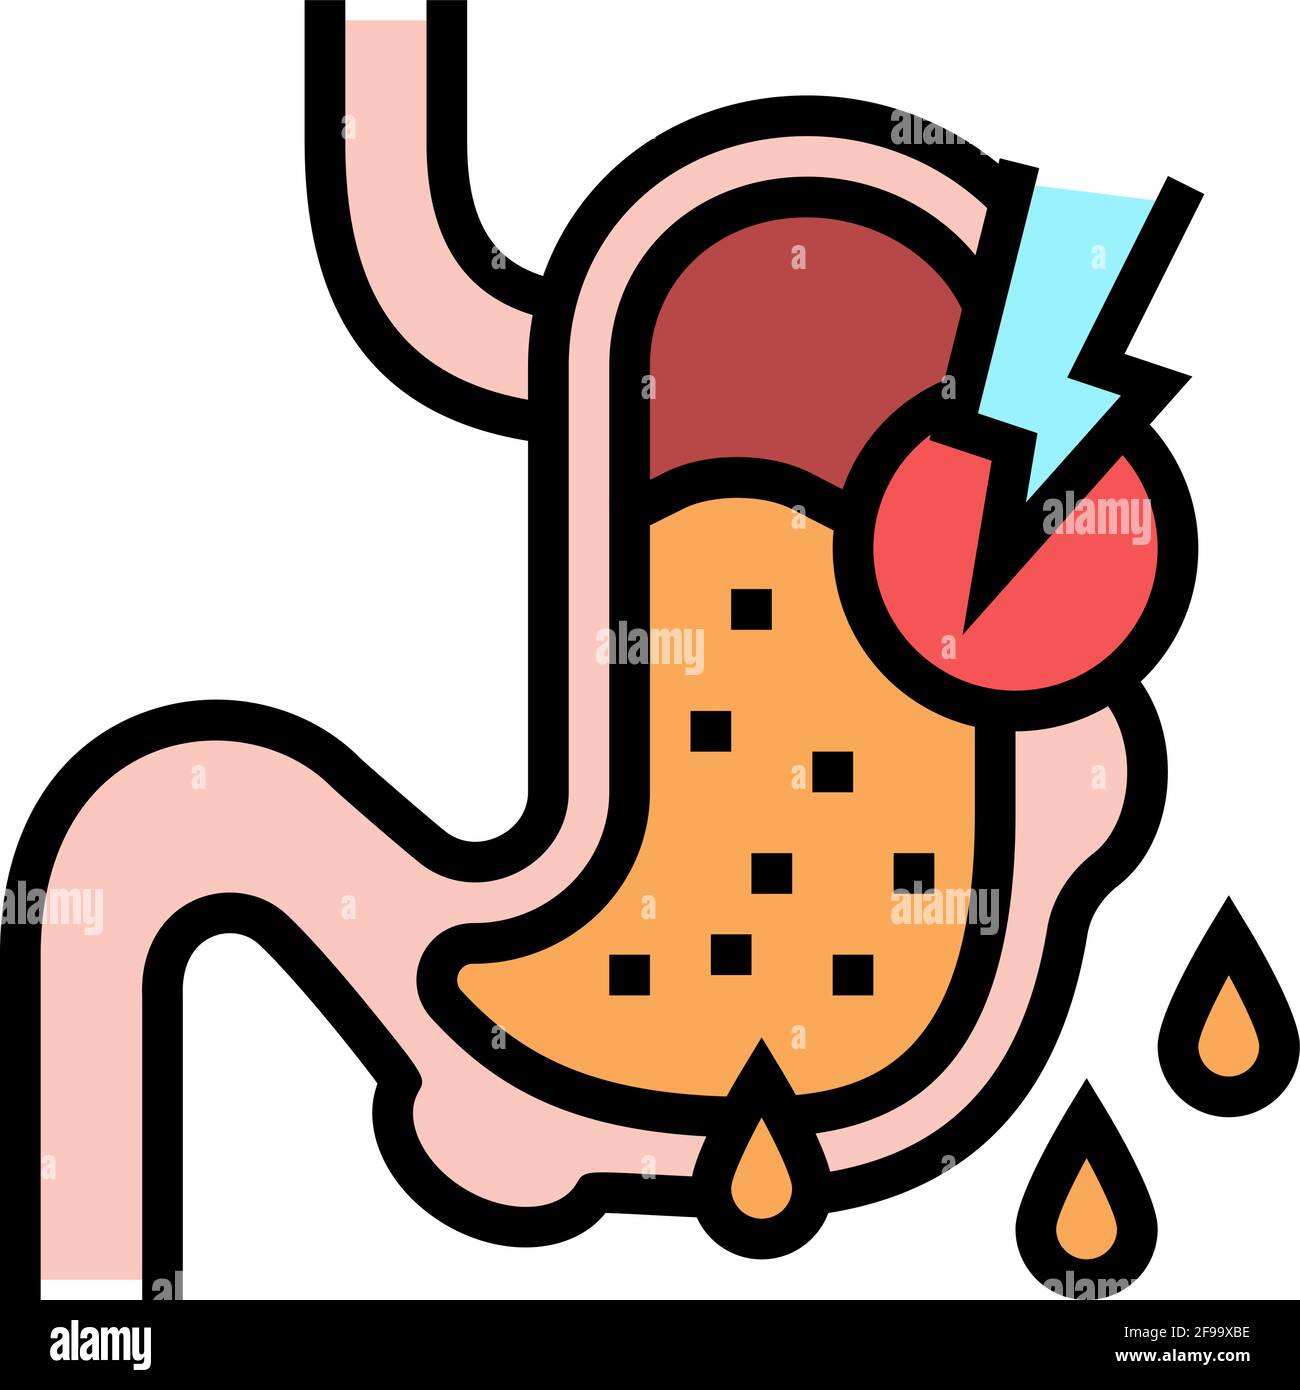 leaks in gastrointestinal system color icon vector illustration Stock Vector